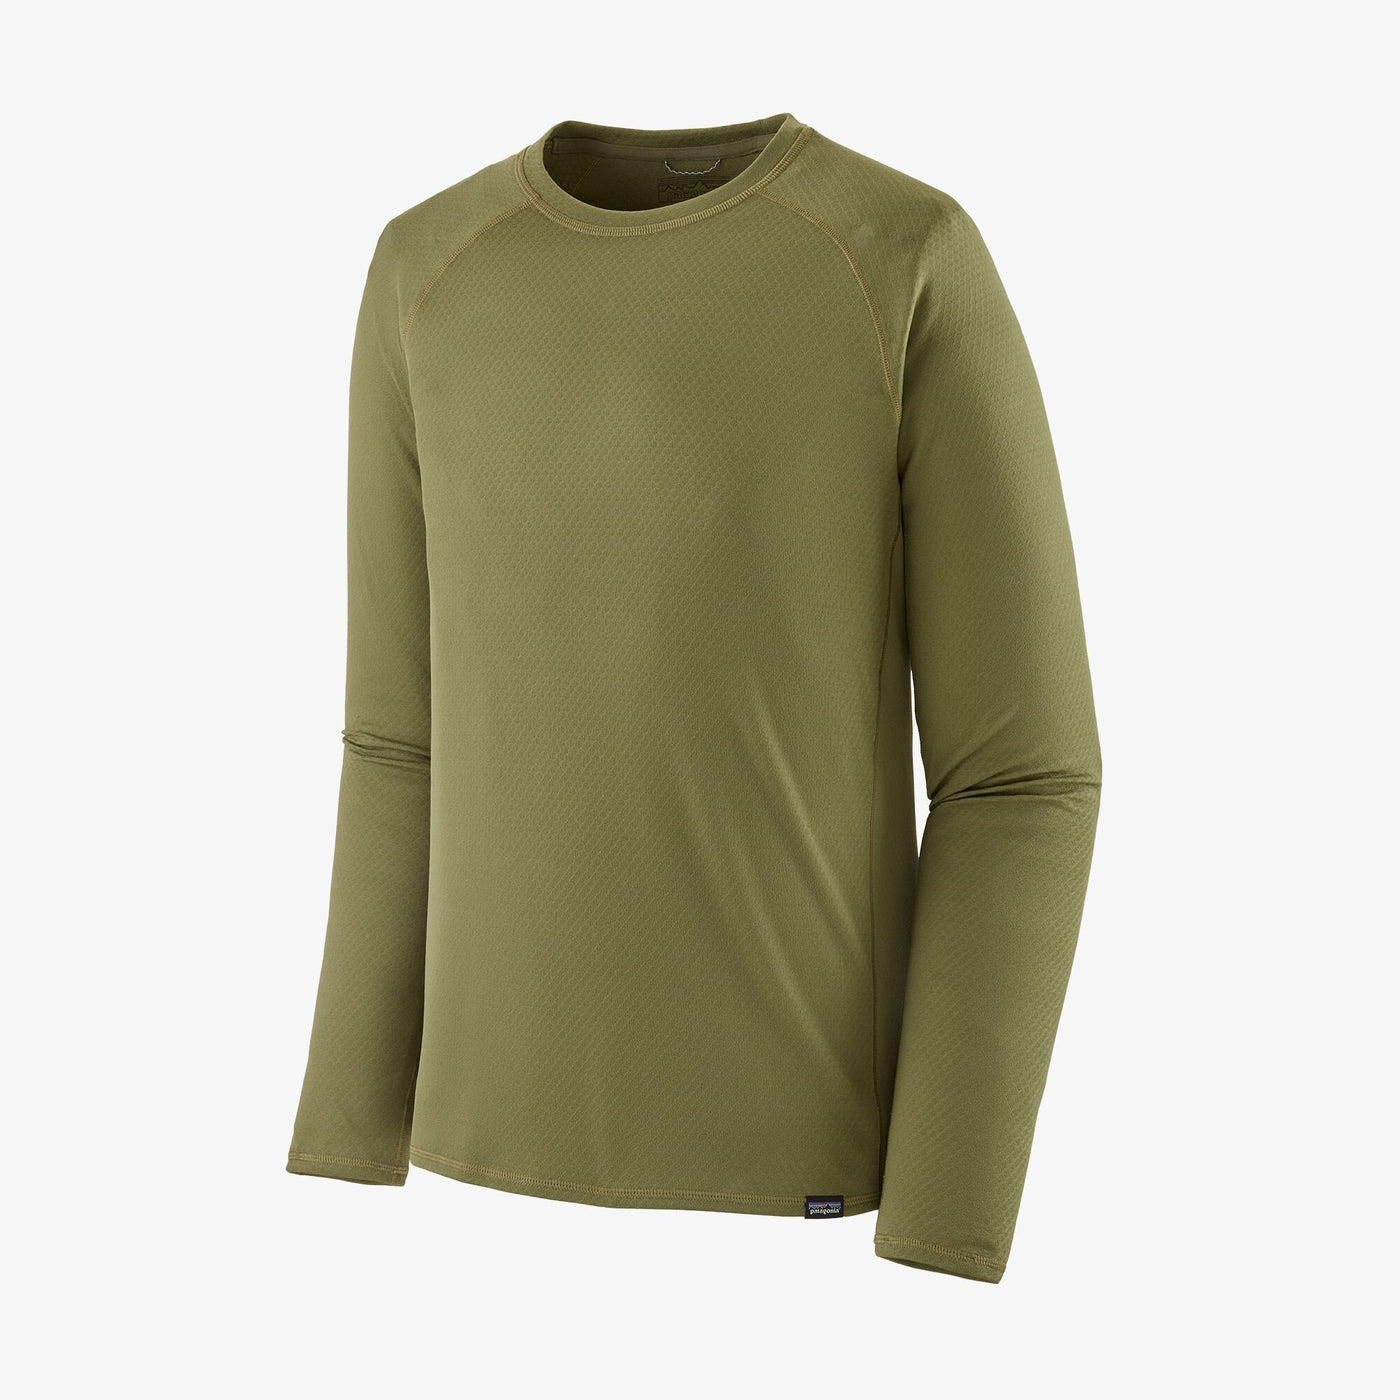 Patagonia Men's Capilene Midweight Crew-MENS CLOTHING-PALO GREEN-S-Kevin's Fine Outdoor Gear & Apparel